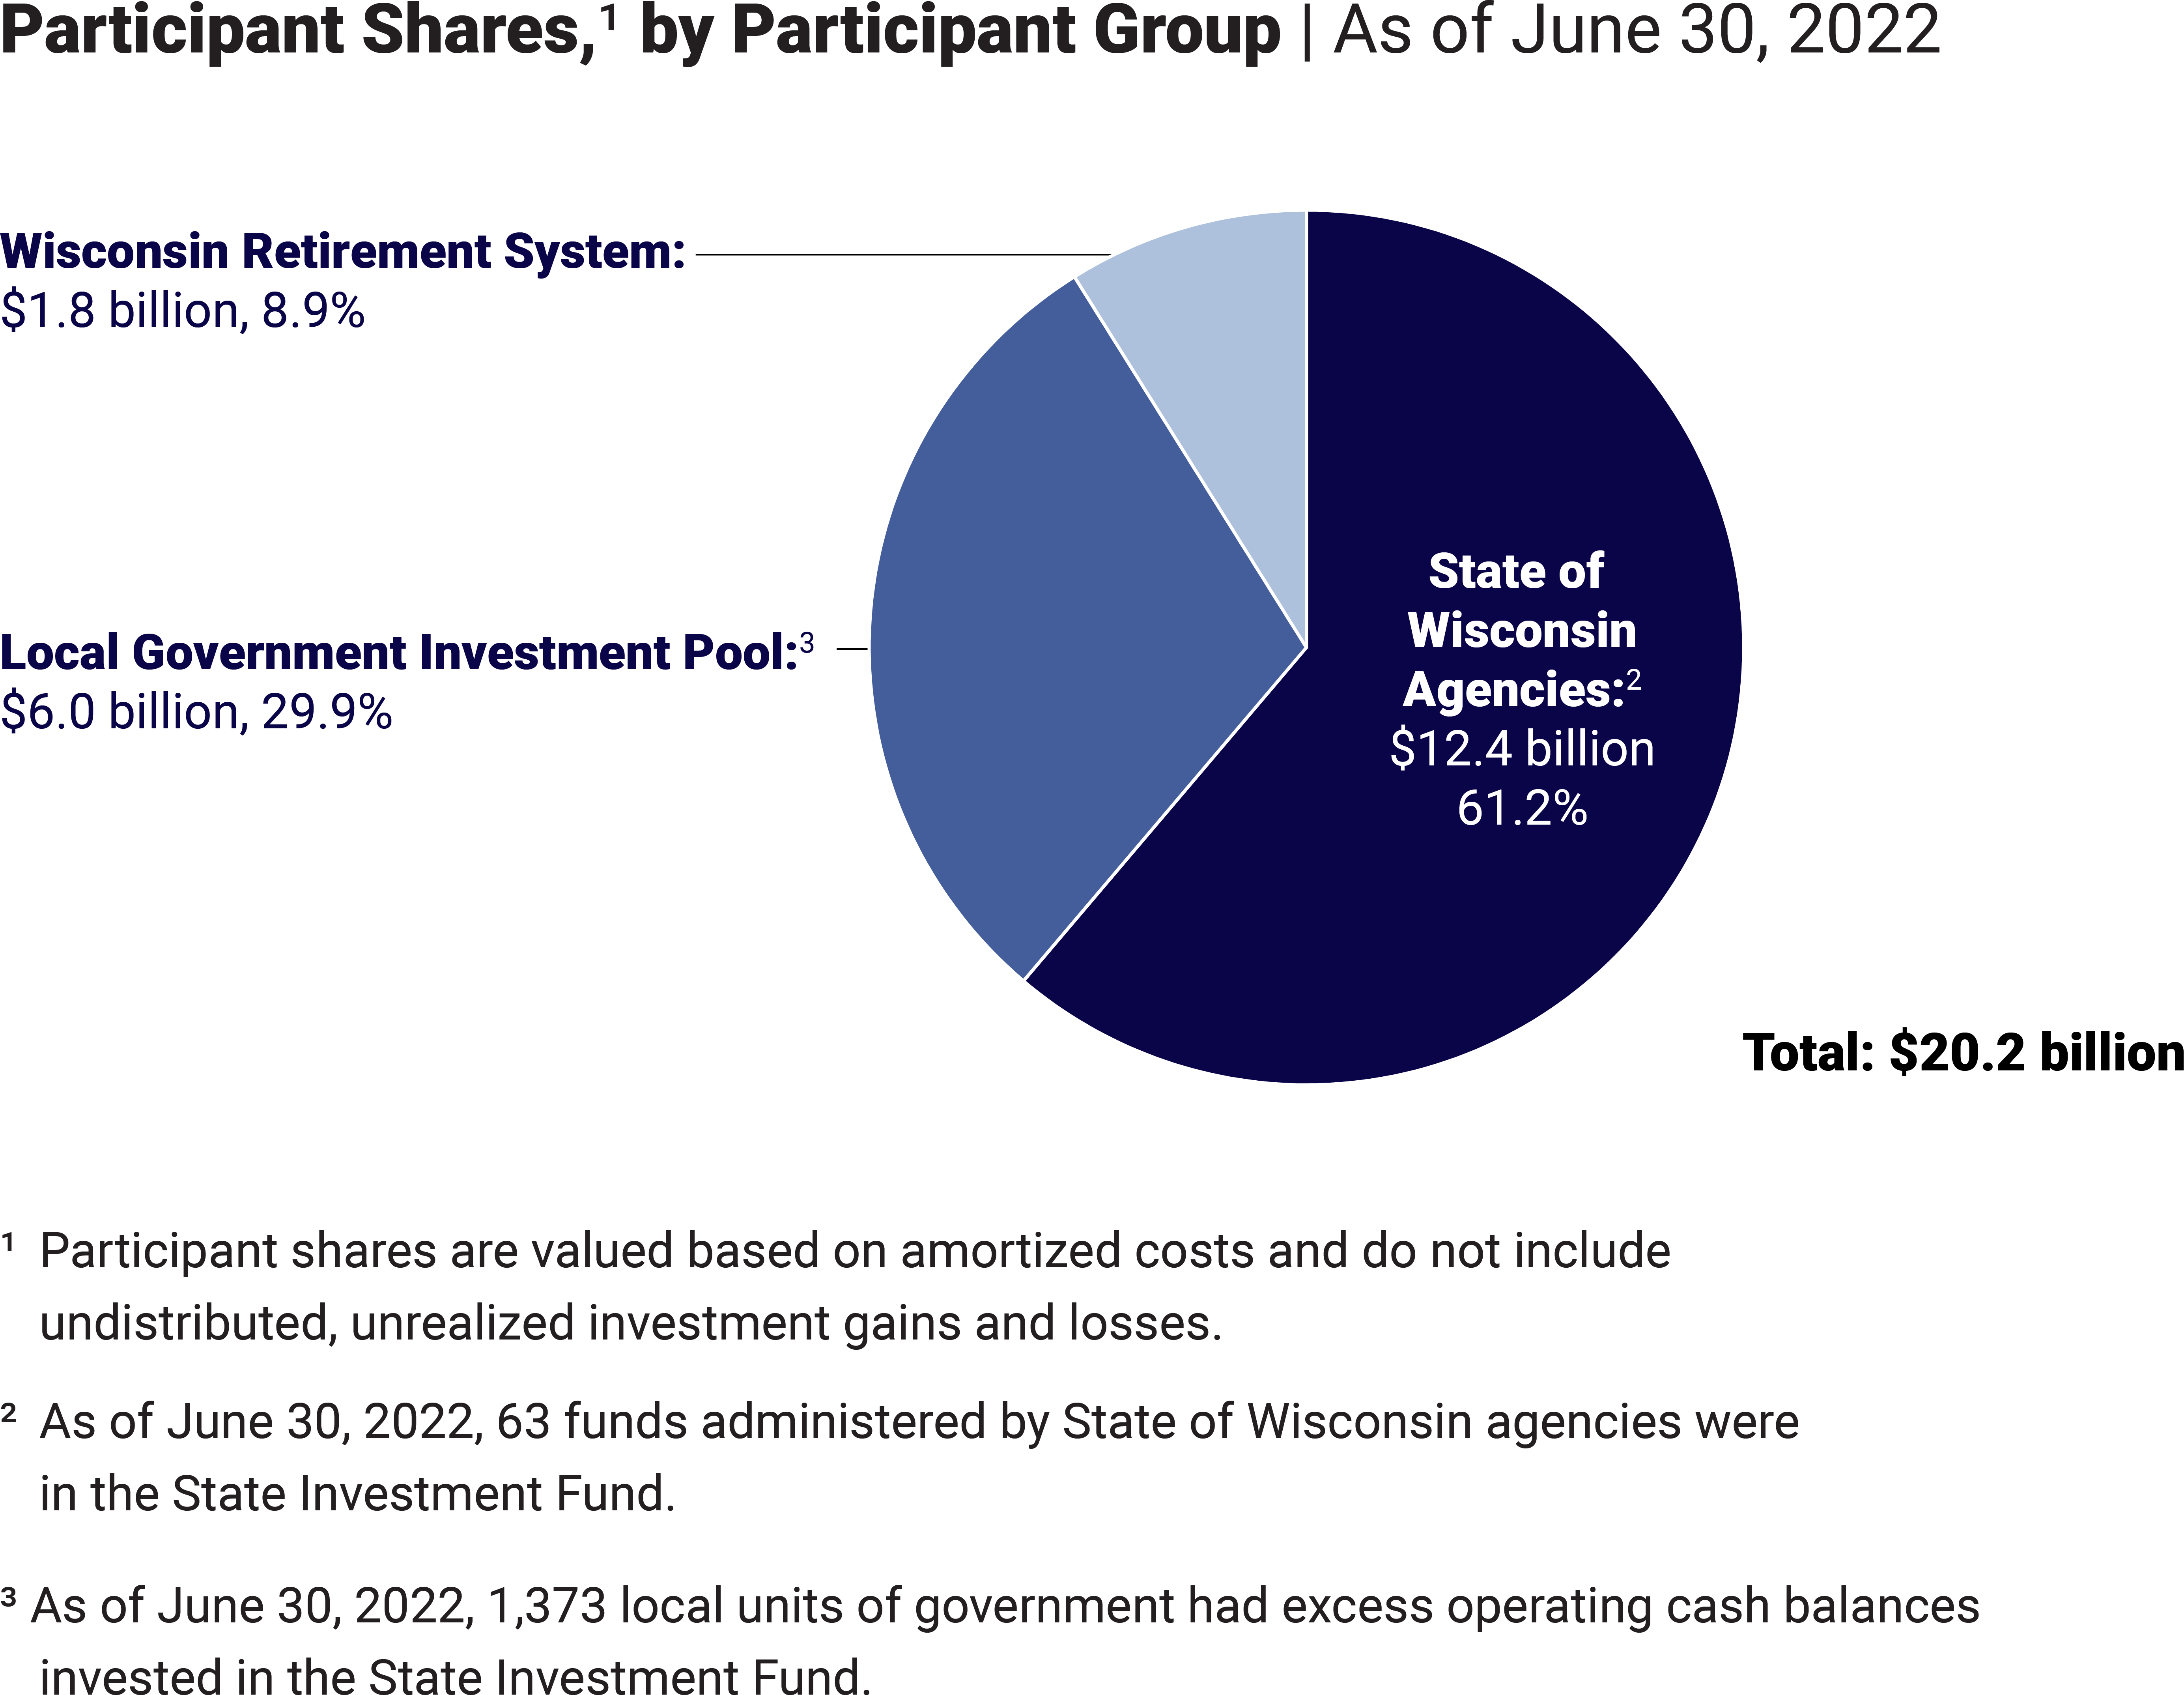 Pie Chart showing the Participant Shares by Participant Group